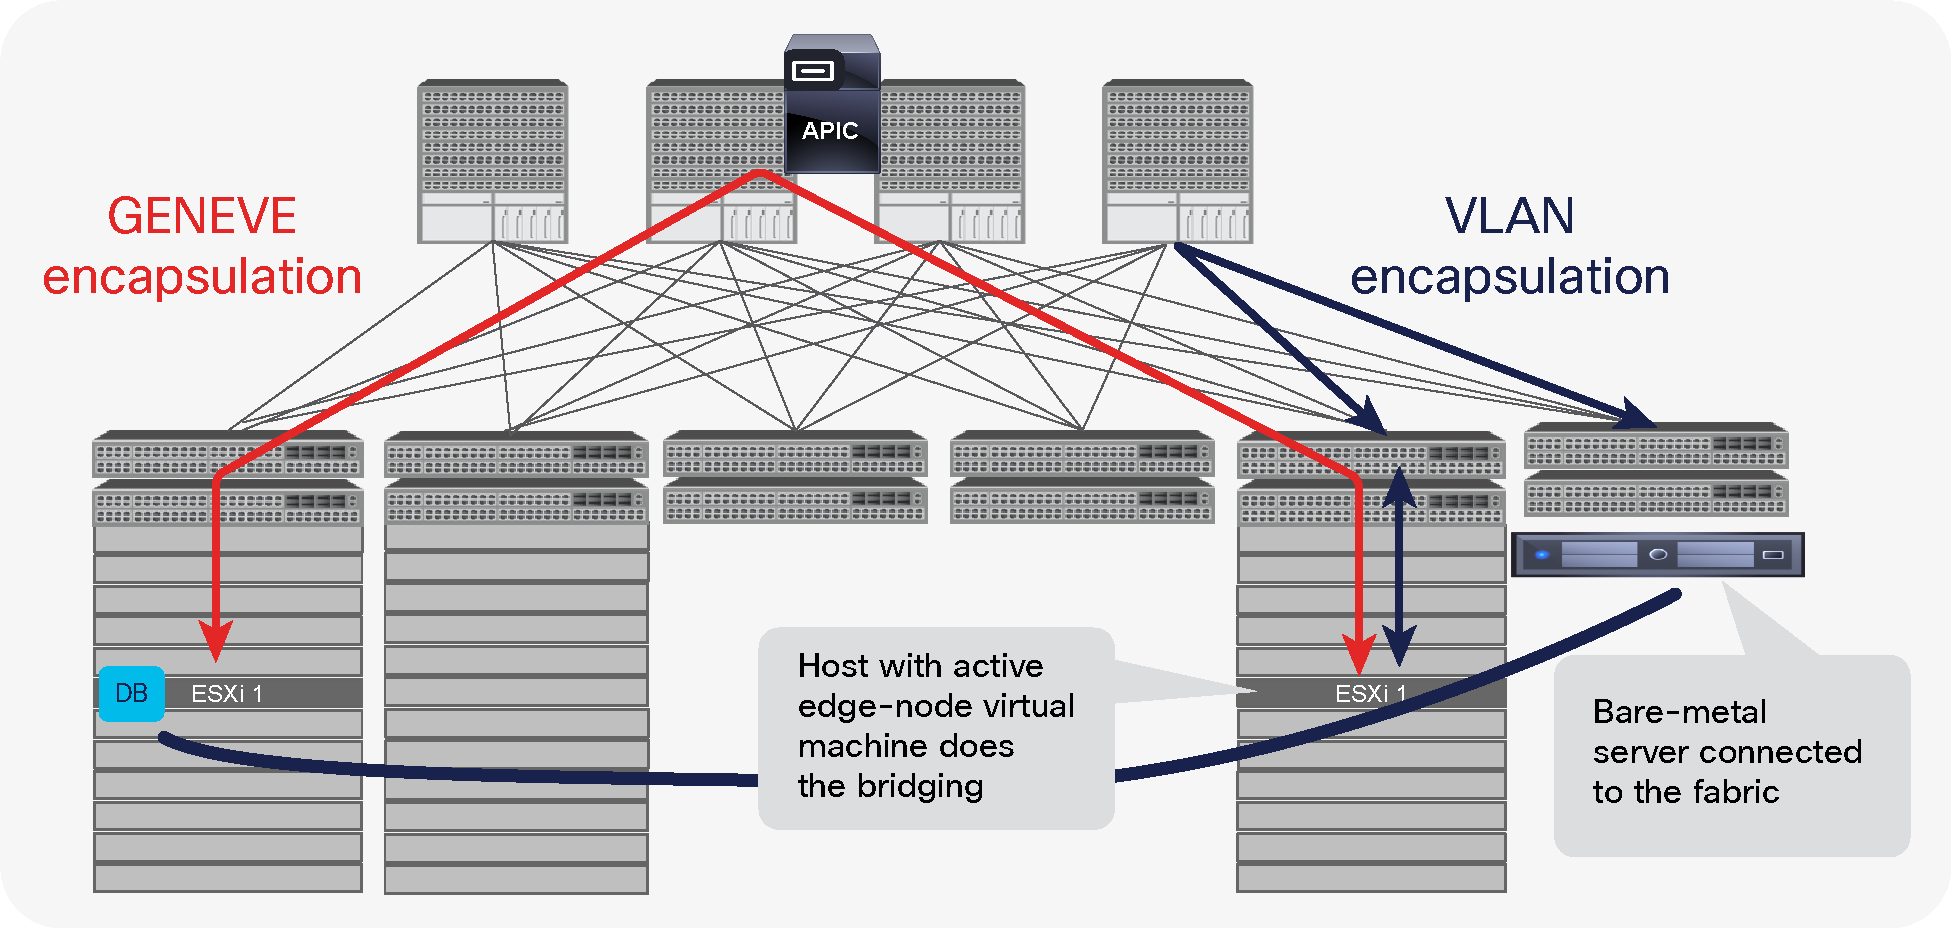 Bare-metal database server and database virtual machine running on the ESXi host share the same subnet